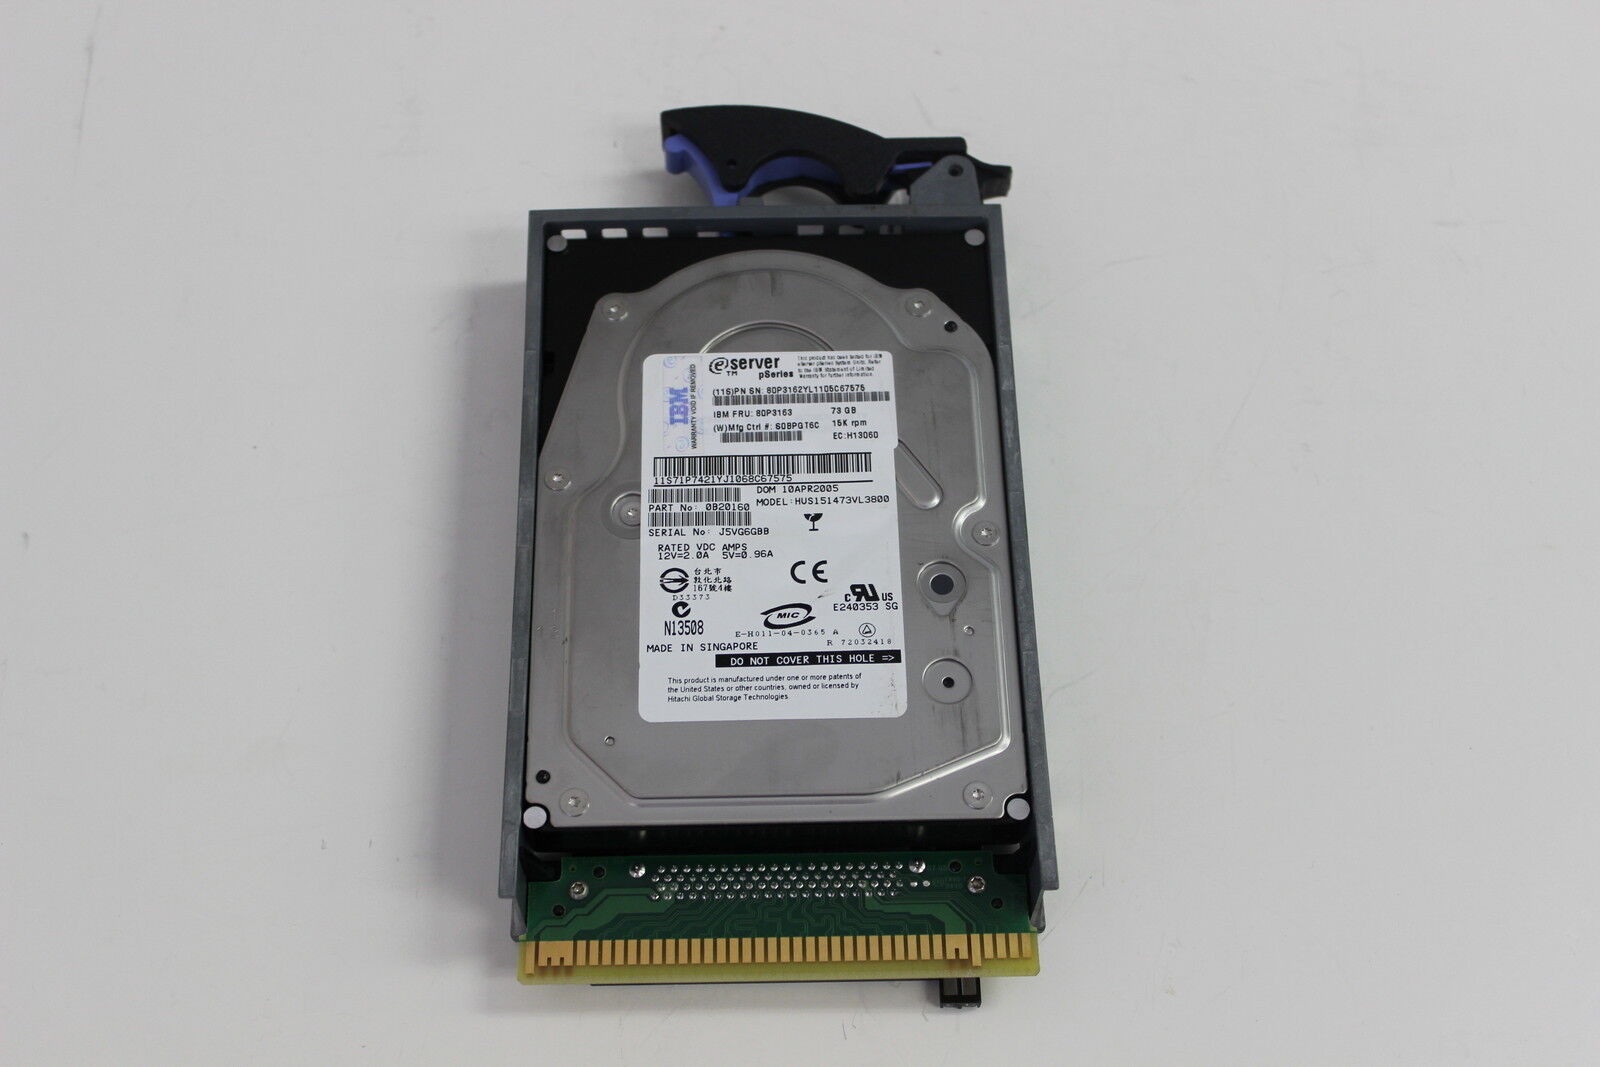 IBM 80P3163 ESERVER 73GB 15K HARD DRIVE WITH TRAY 80P3162 71P7421 WITH WARRANTY